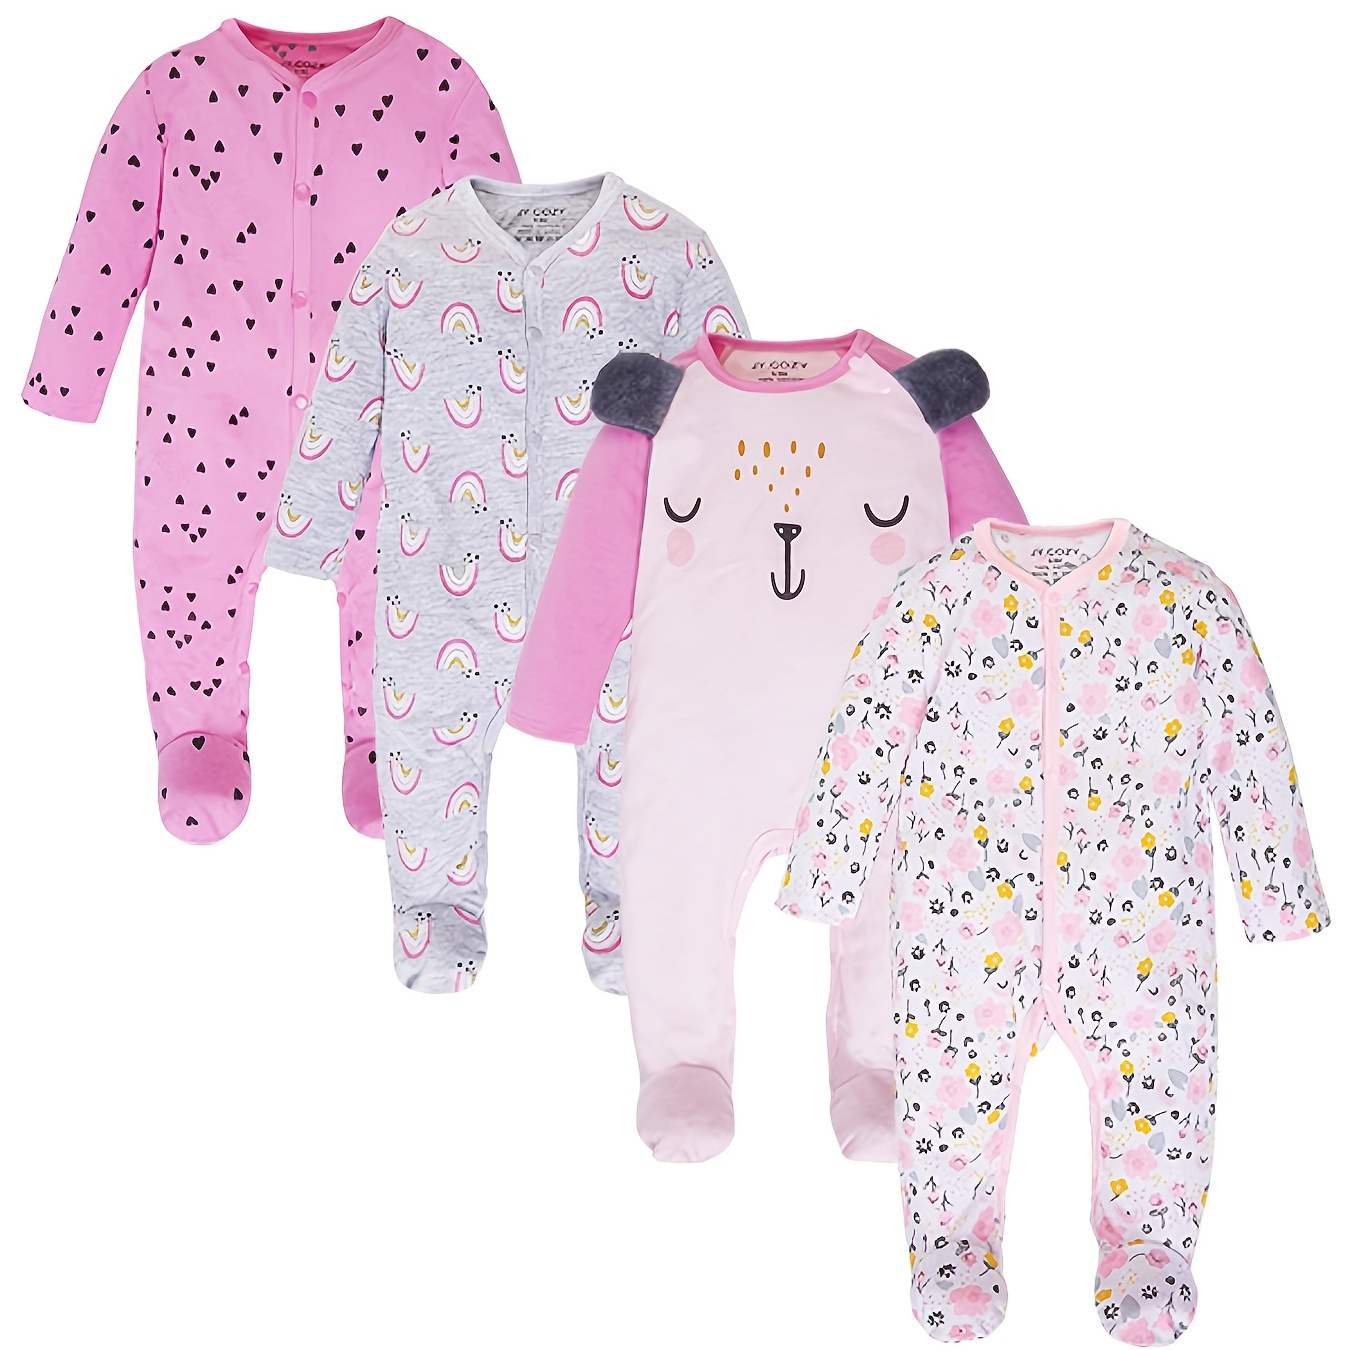 

4pcs Newborn Baby Girl Cute Graphic Cotton Footed Romper, Comfortable Breathable Baby Bodysuit 0-12m